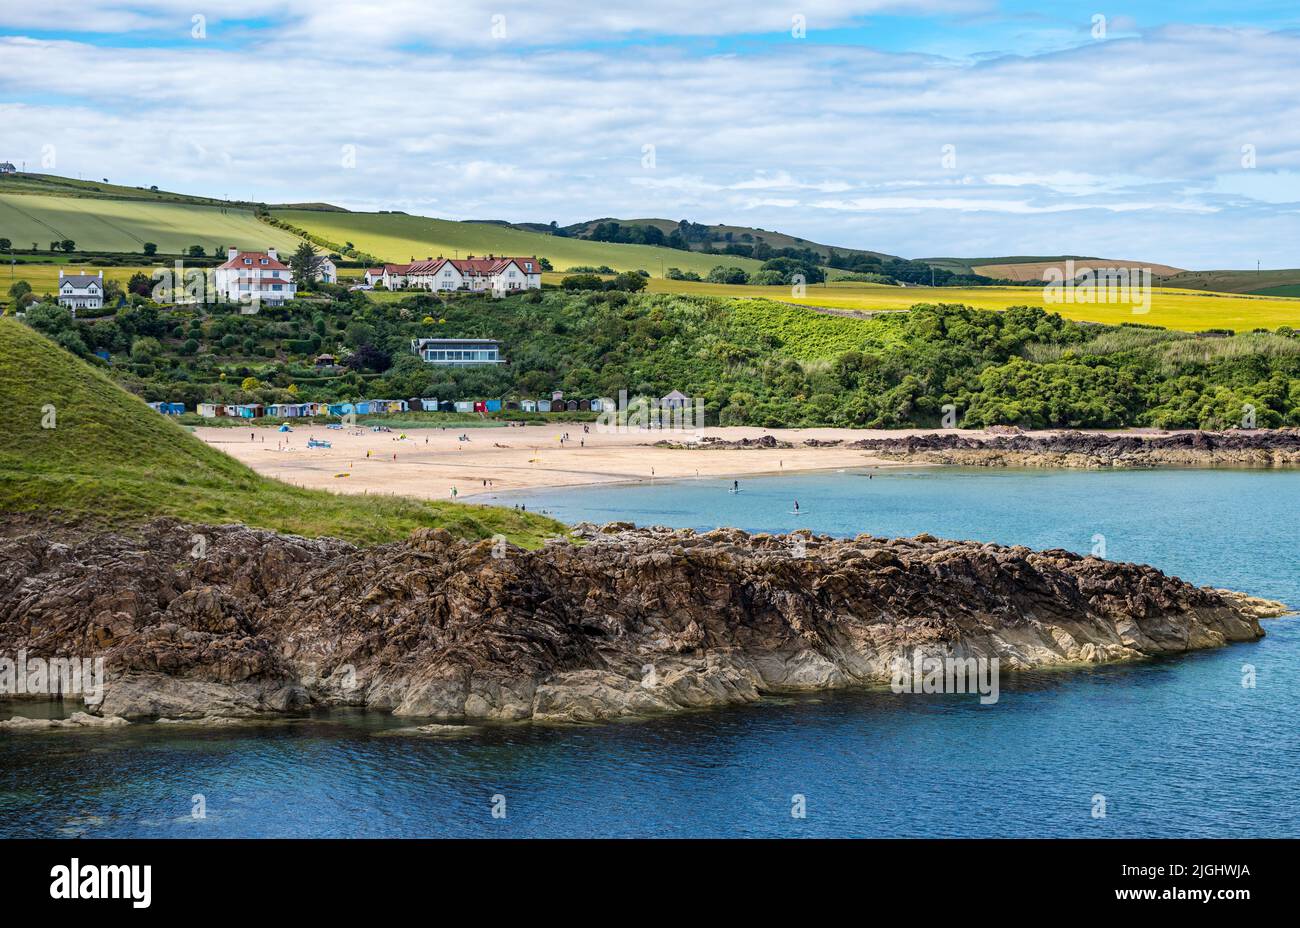 View of Coldingham Bay with beach huts and people at seaside in Summer, Berwickshire, Scotland, UK Stock Photo